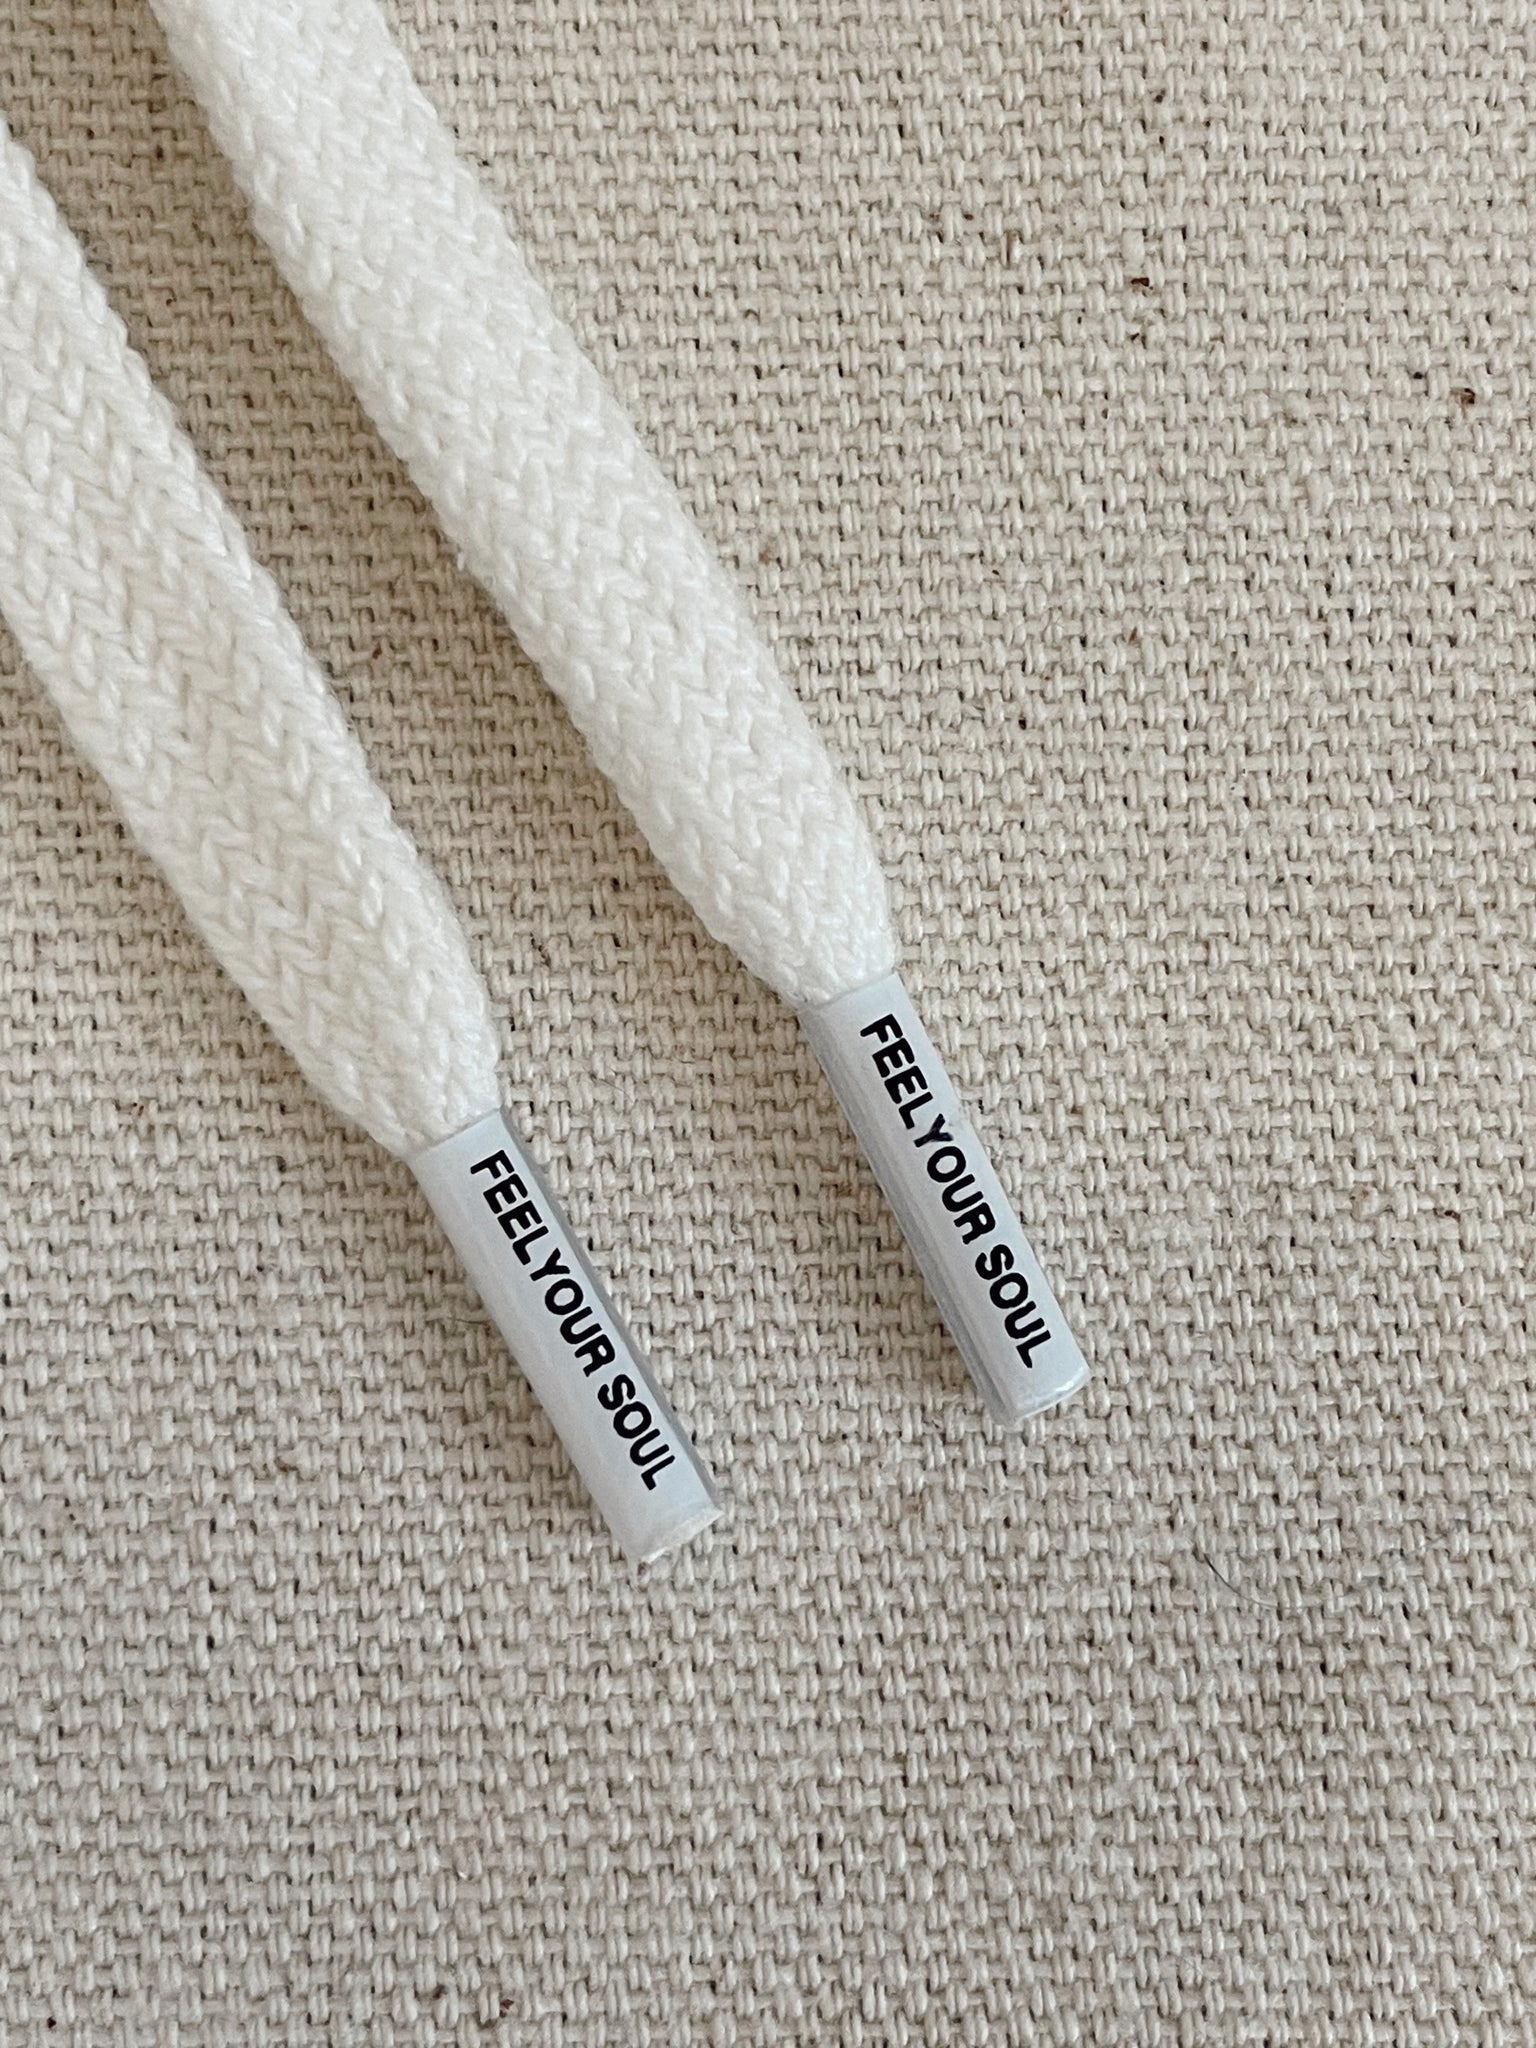 converse all star shoe laces